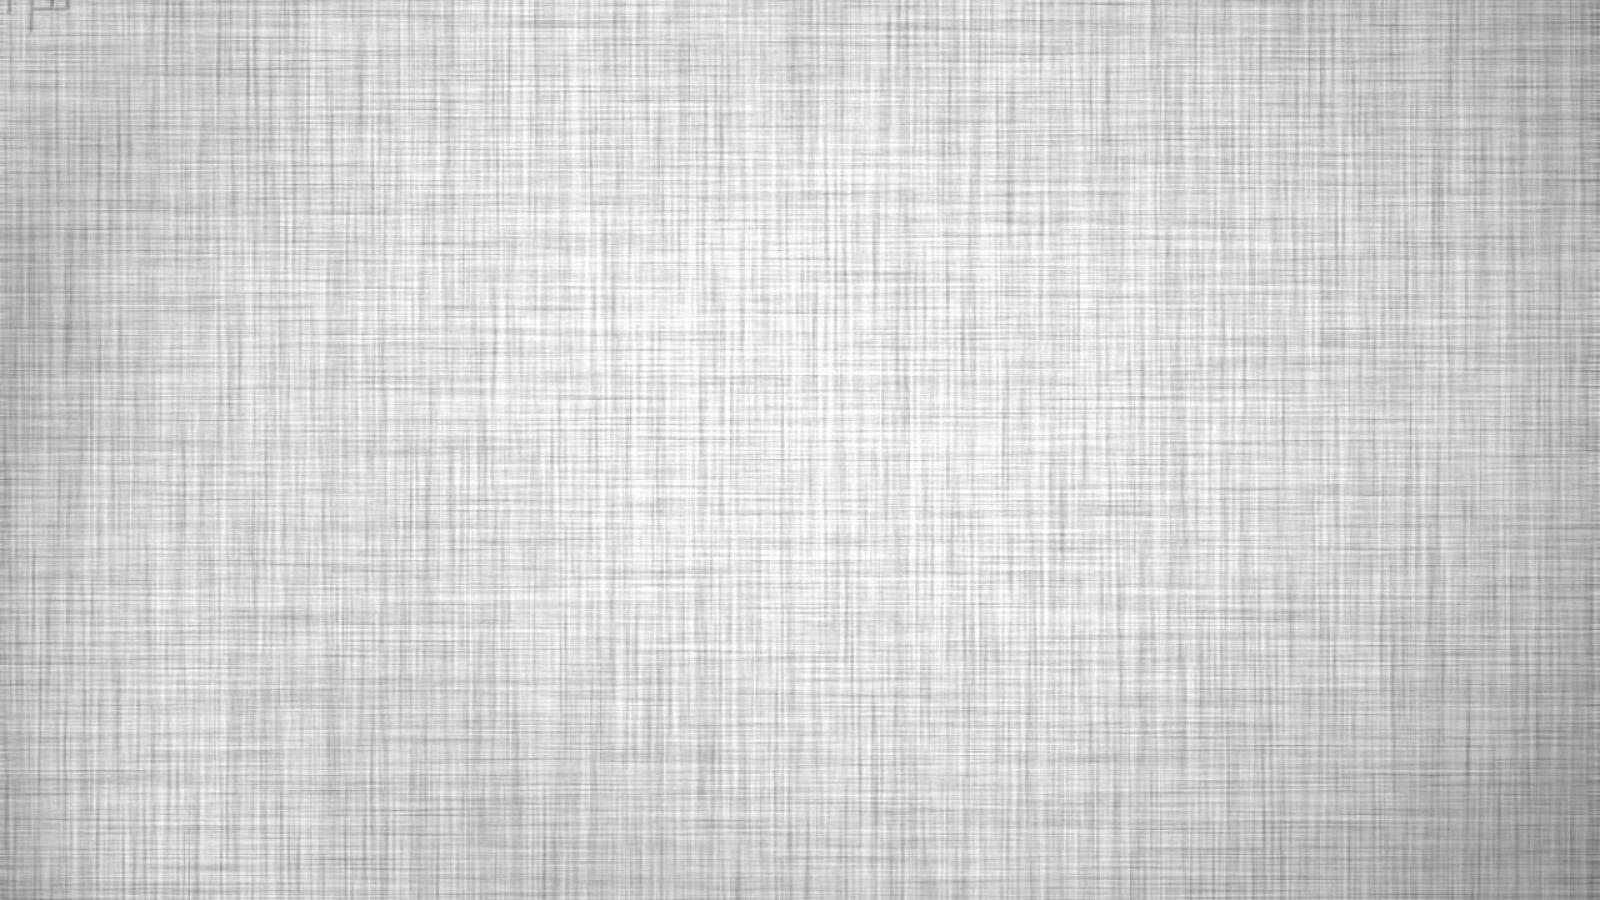 Plain White Background Wallpaper Hd Middlebury college thesis carrel